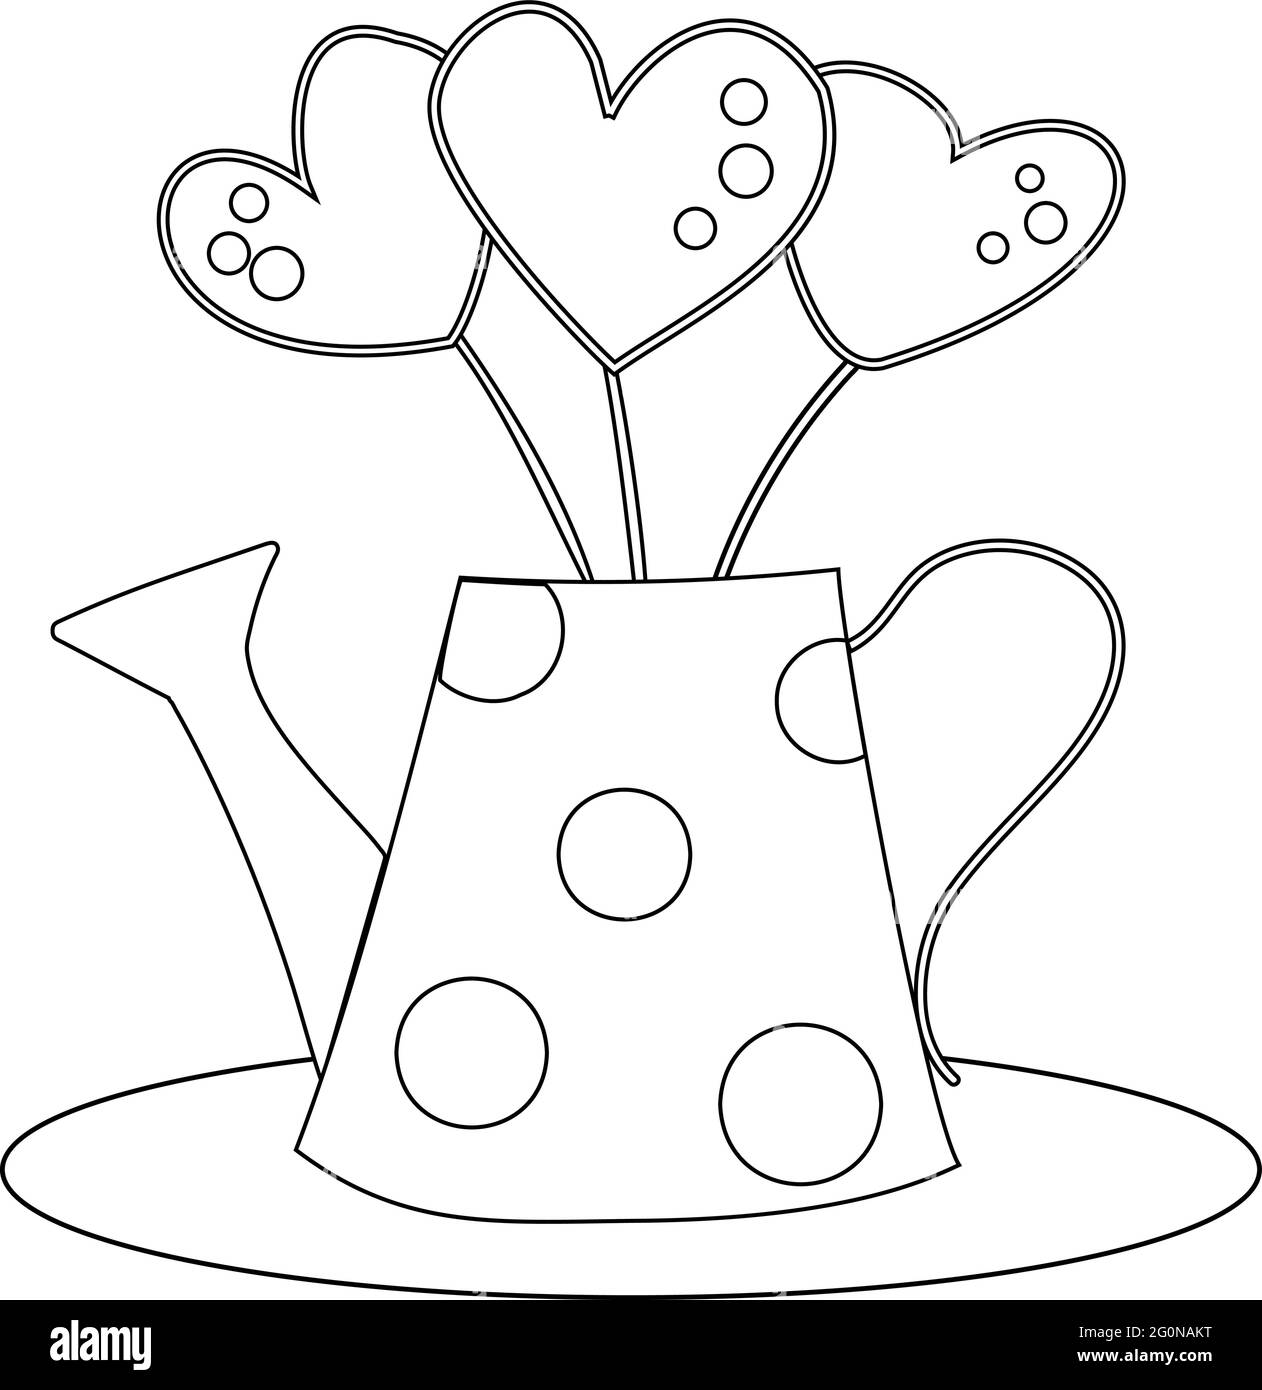 Retro watering can with polka dots, with a bouquet of three hearts on sticks, isolated on a white background. Stock Vector